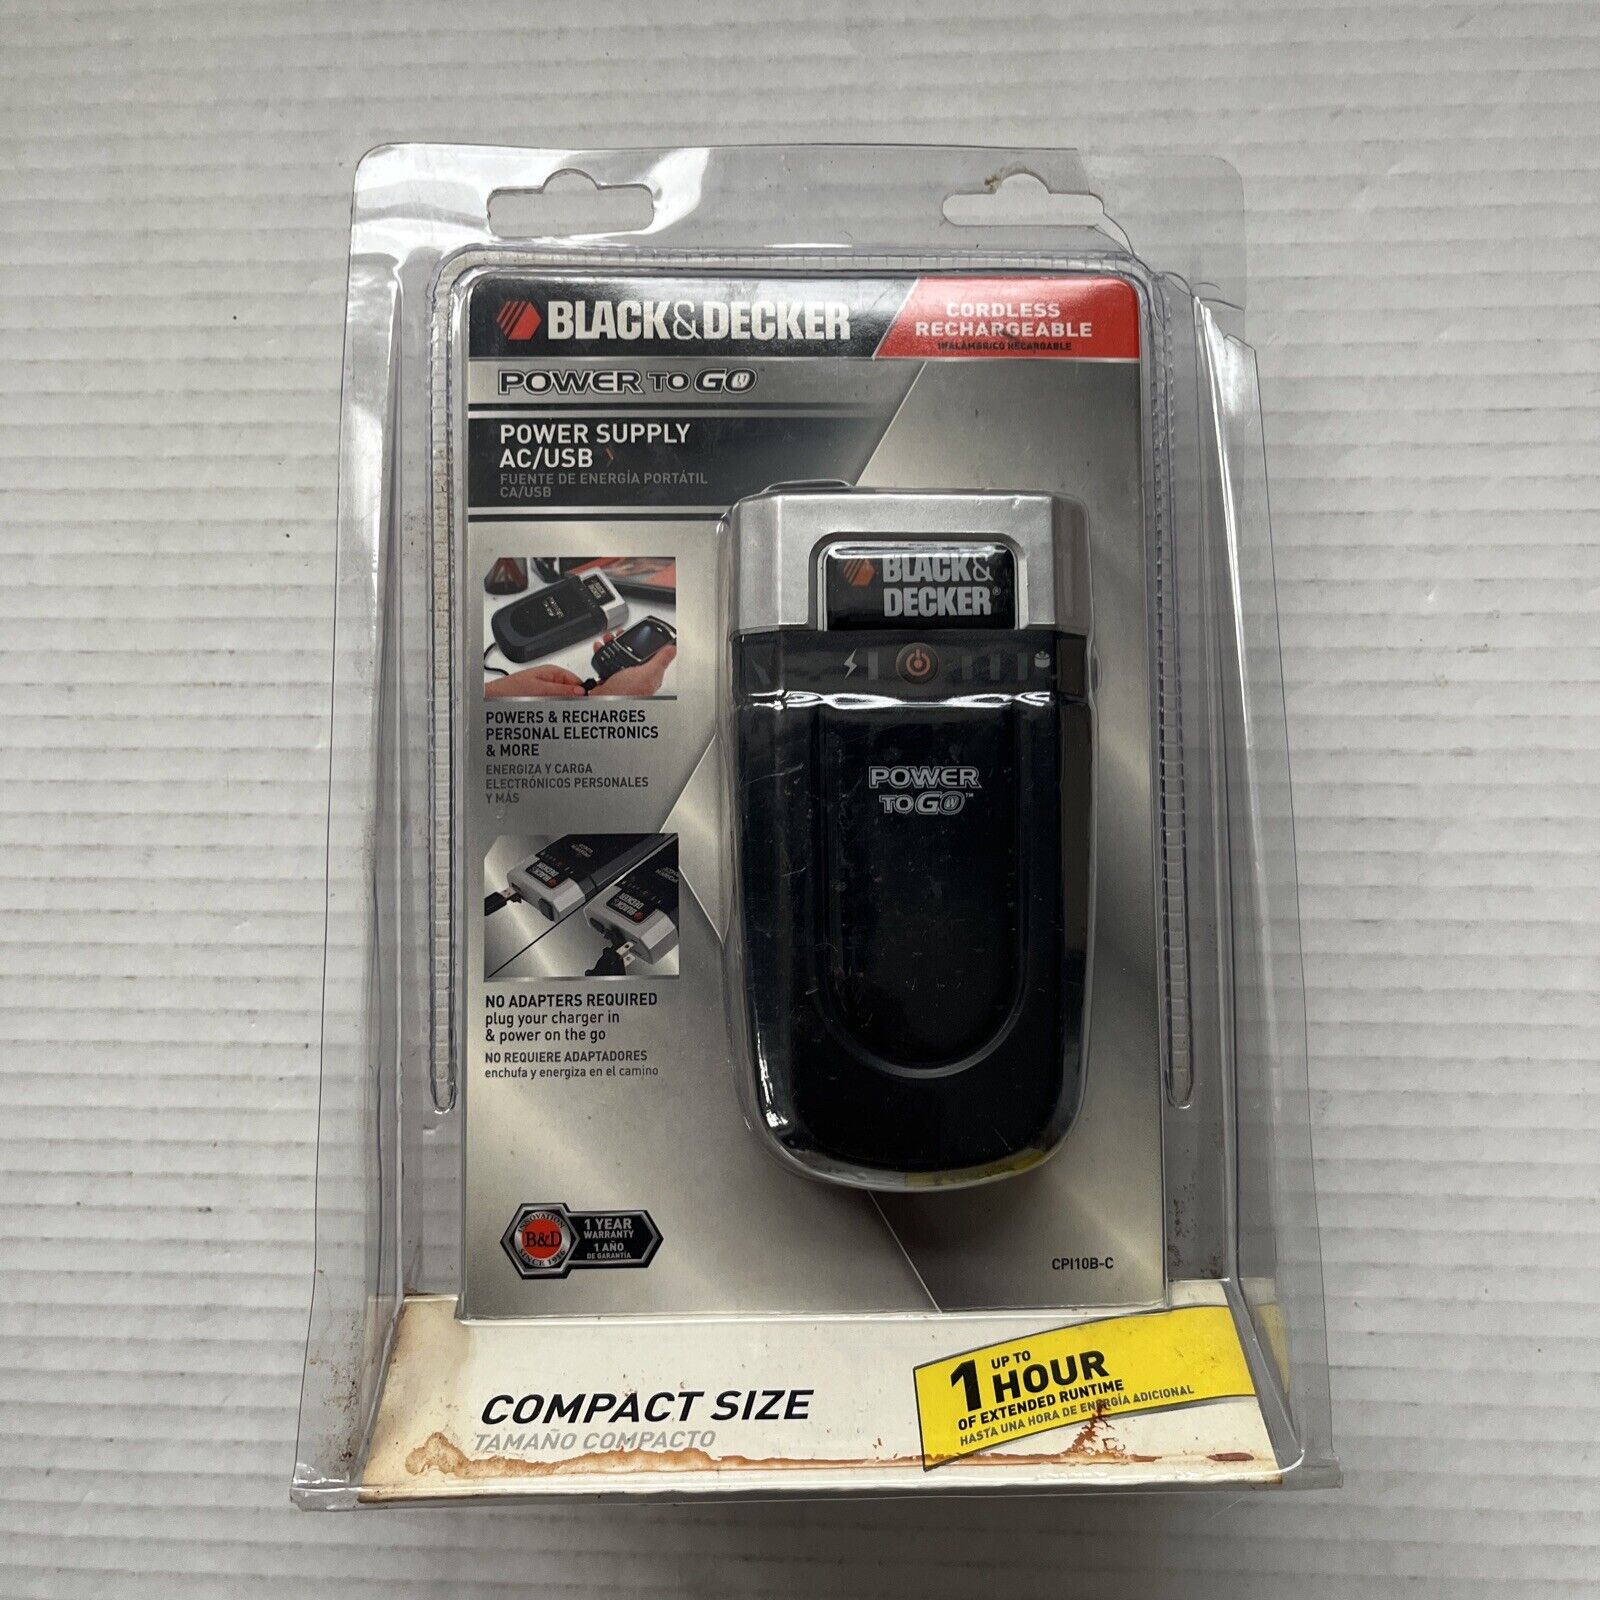 Black & Decker Power To Go Cordless Rechargeable Power Supply AC/USB Portable